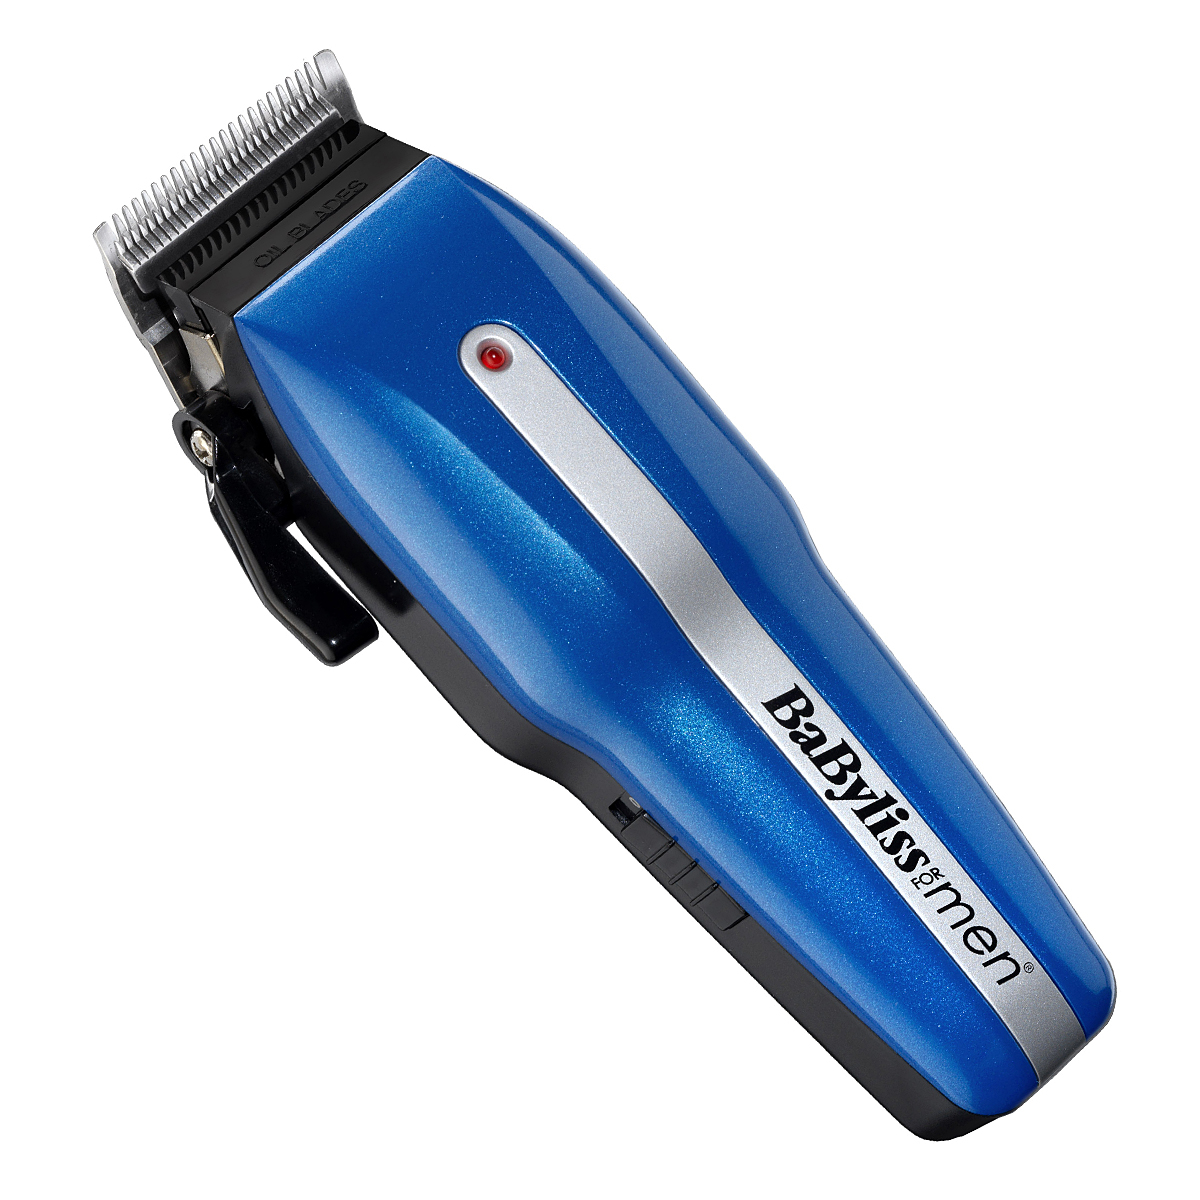 babyliss power light pro clippers